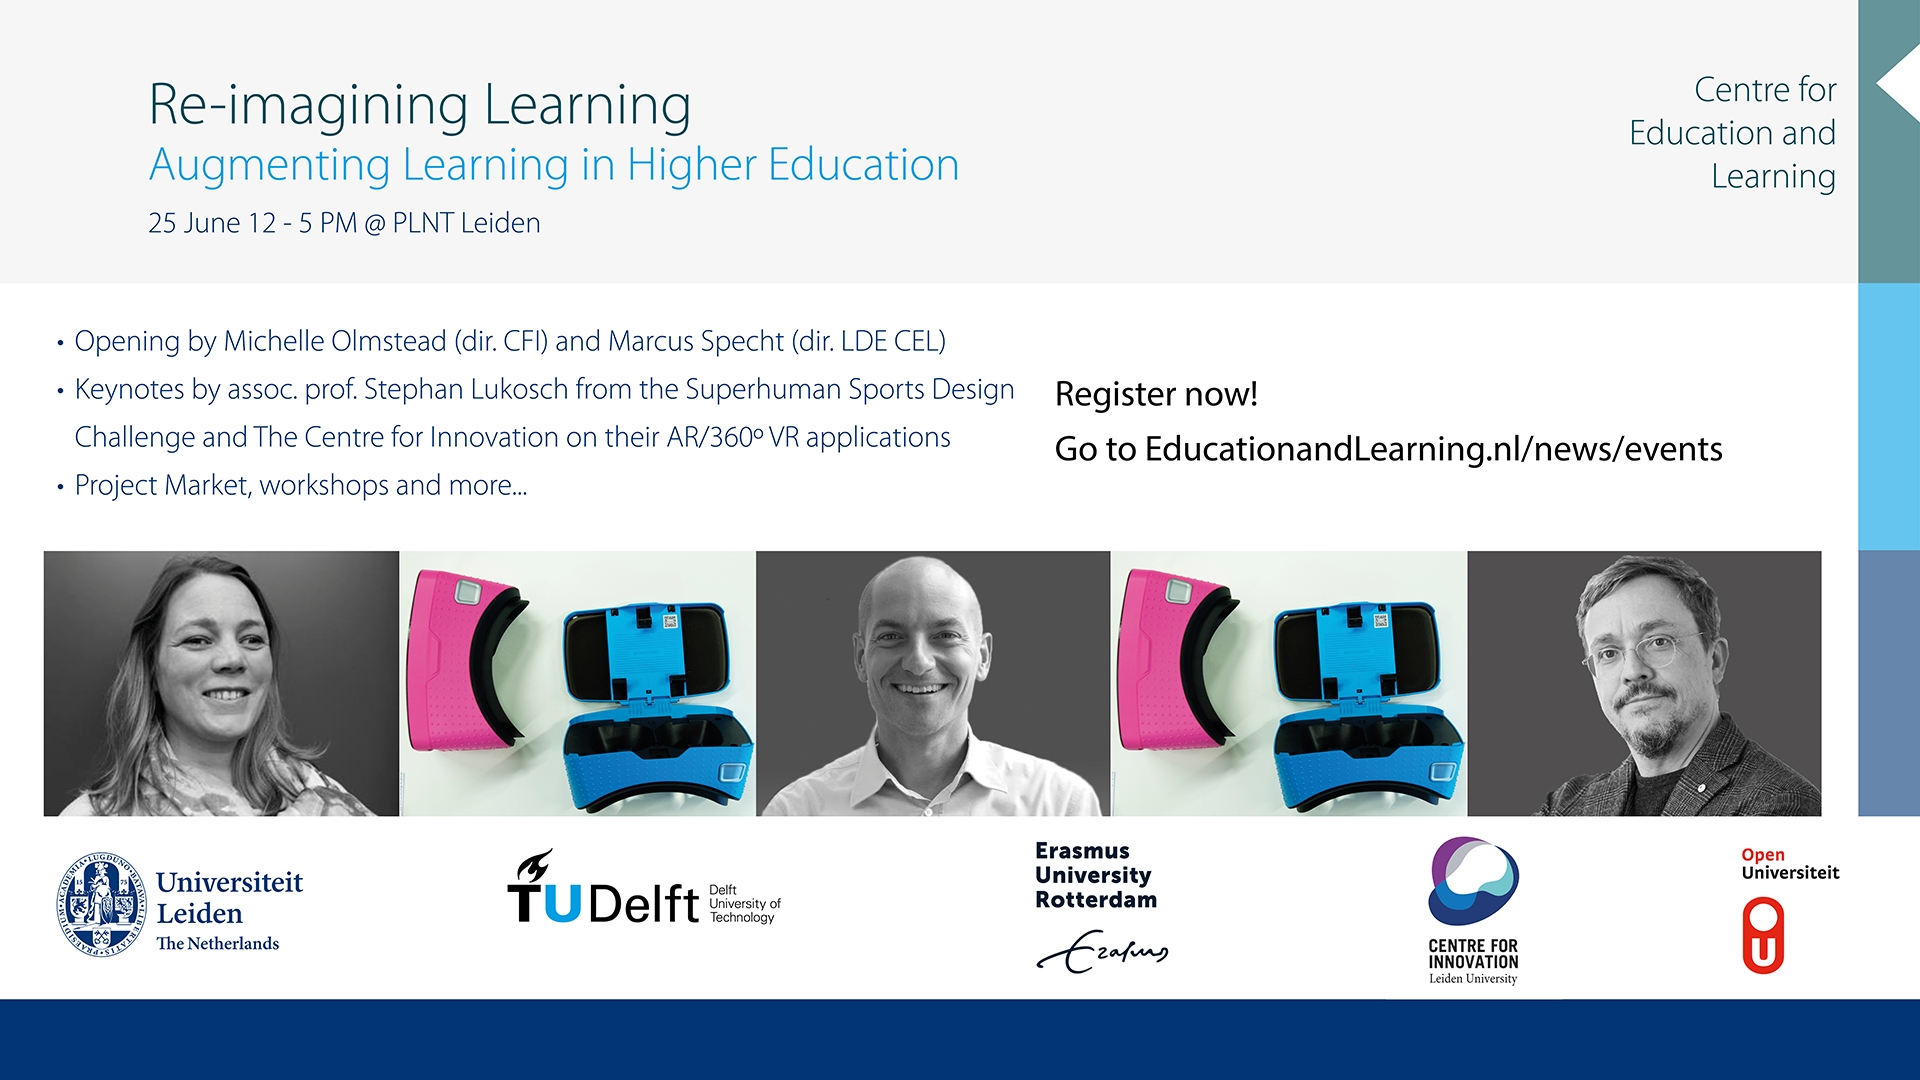 Re-imagining learning: Augmenting Learning in Higher Education